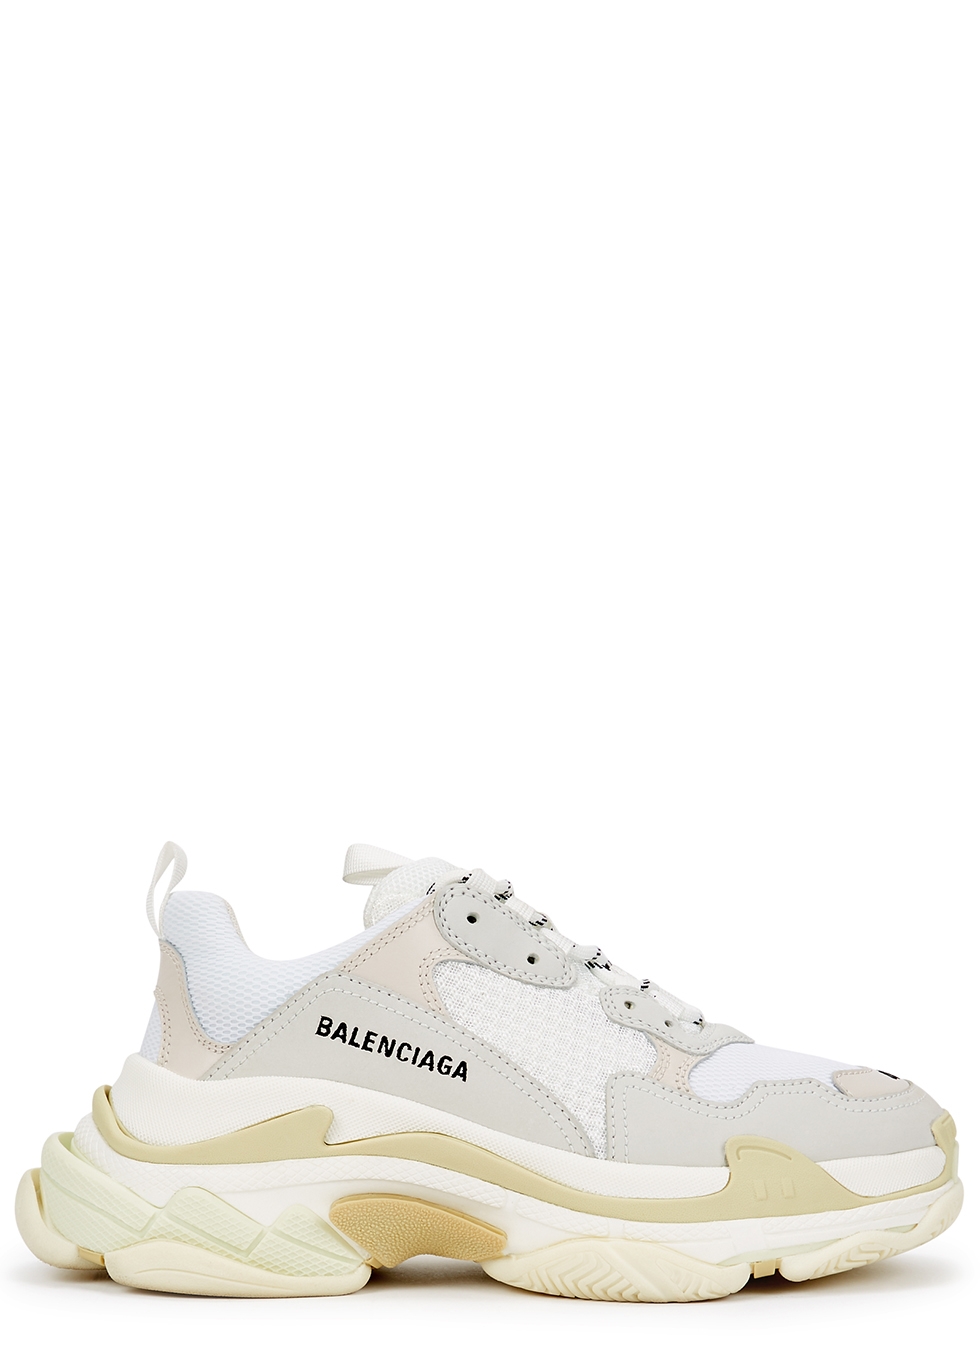 Free Balenciaga Triple S Low Top Trainers Black for Sale